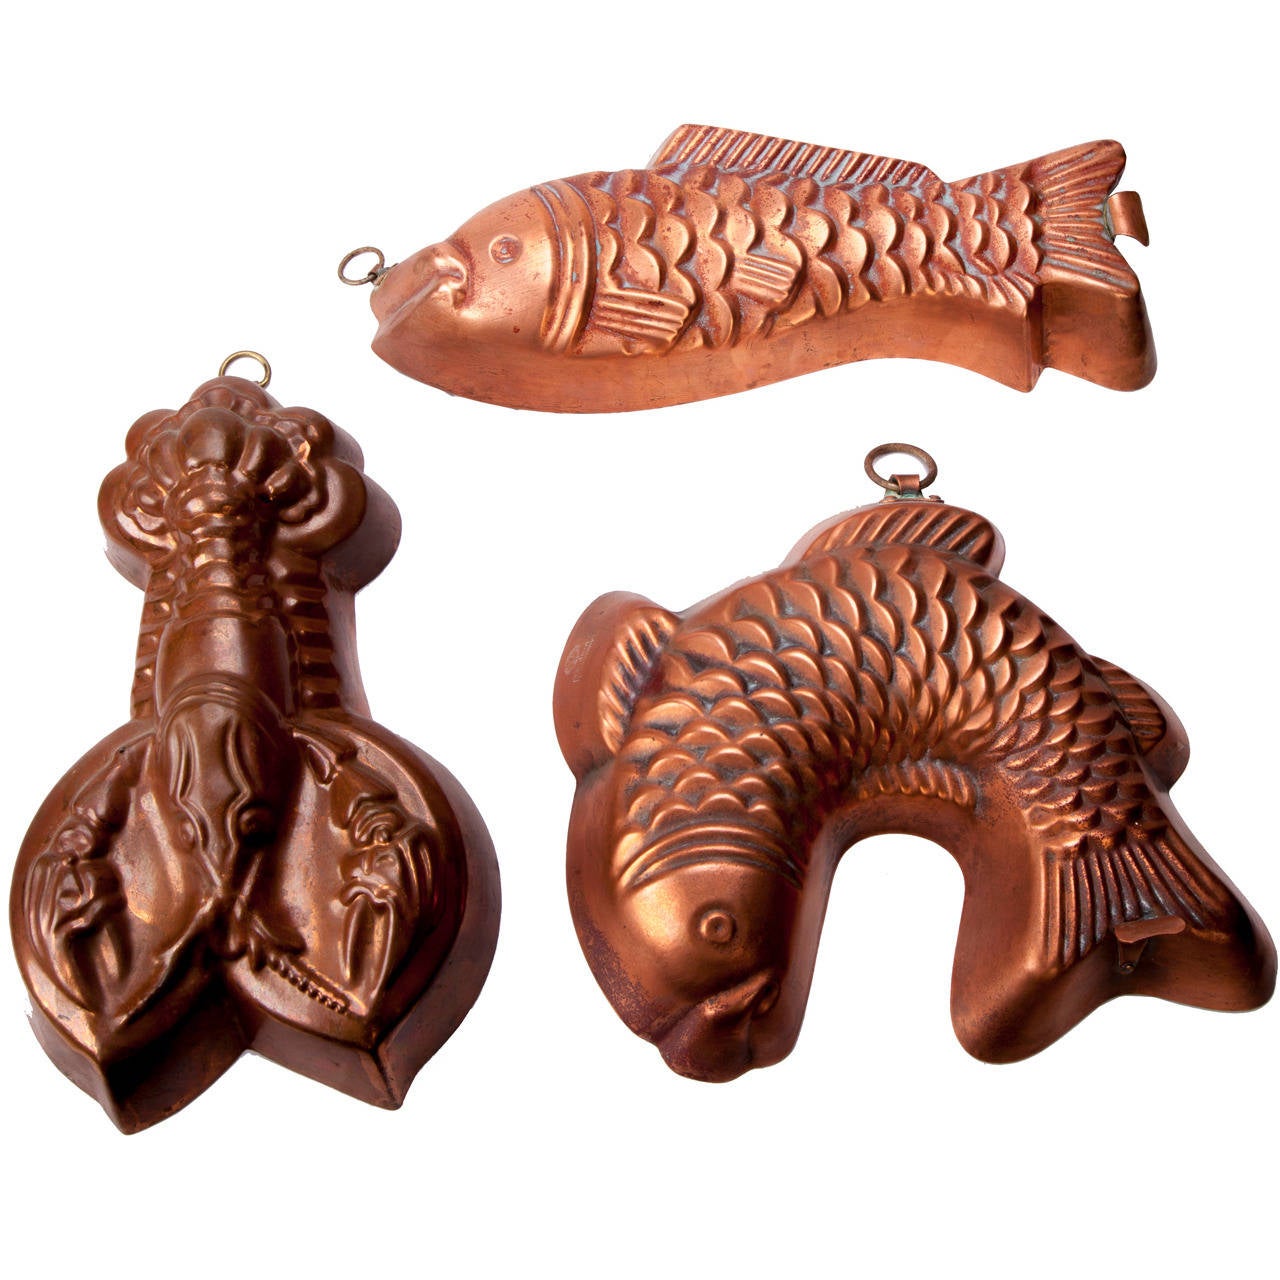 Antique German Fish and Lobster Copper Moulds